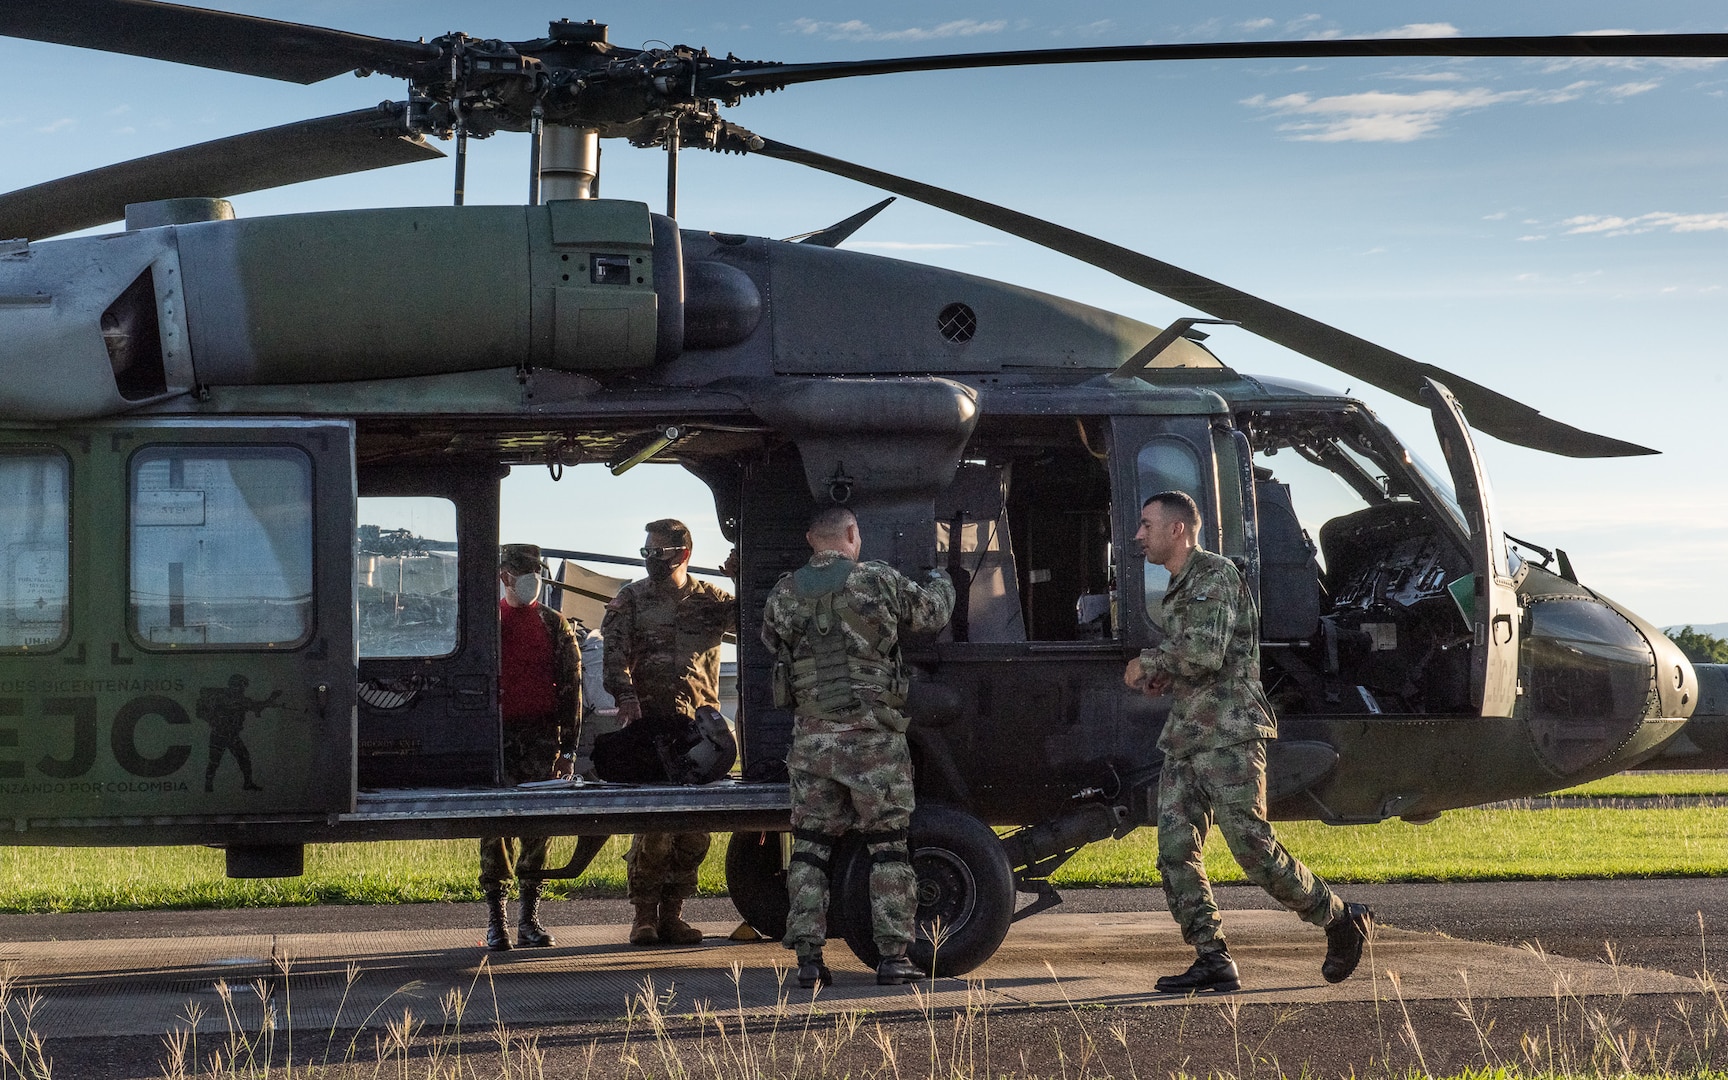 U.S. Army Chief Warrant Officer 3 Mauricio Garcia, left inside Black Hawk door, and his Colombian safety officer counterpart, Capt. Cristian Castiblanco, inspect a refueling operation at Tolemaida Army Base in Colombia.